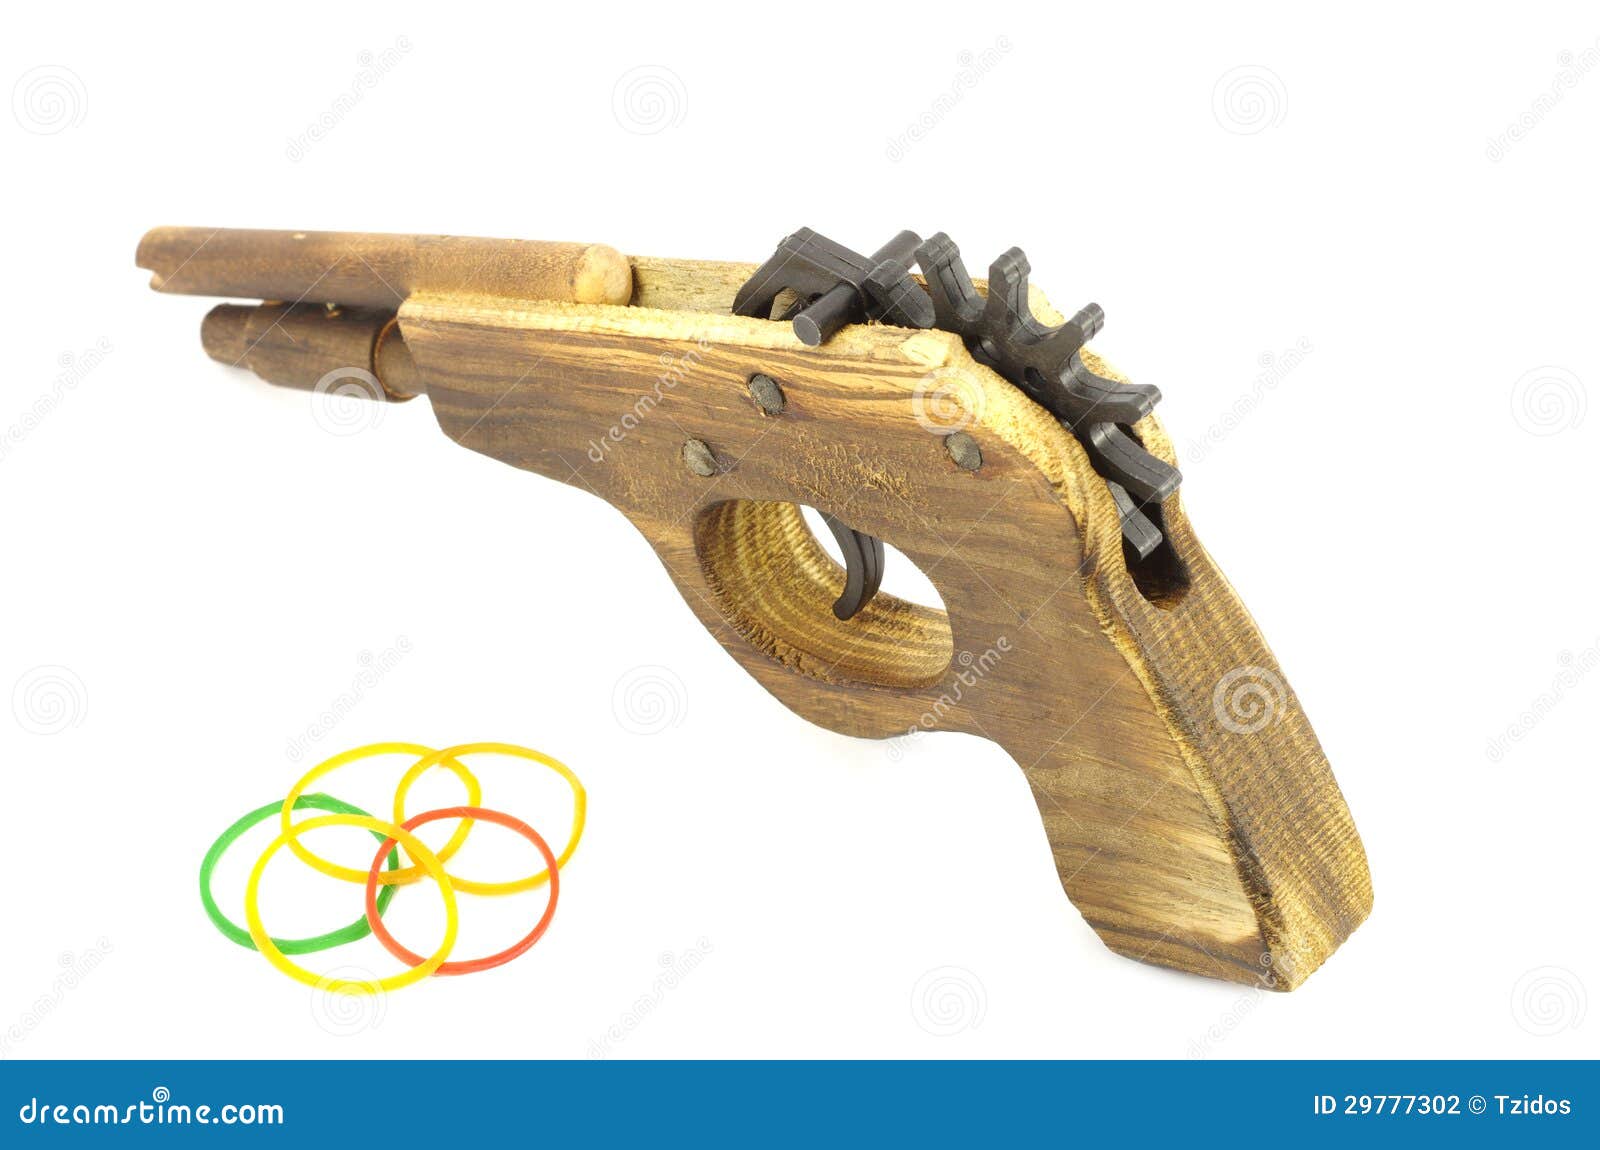 Wooden Catapult Gun With Rubber Stock Photography - Image: 29777302